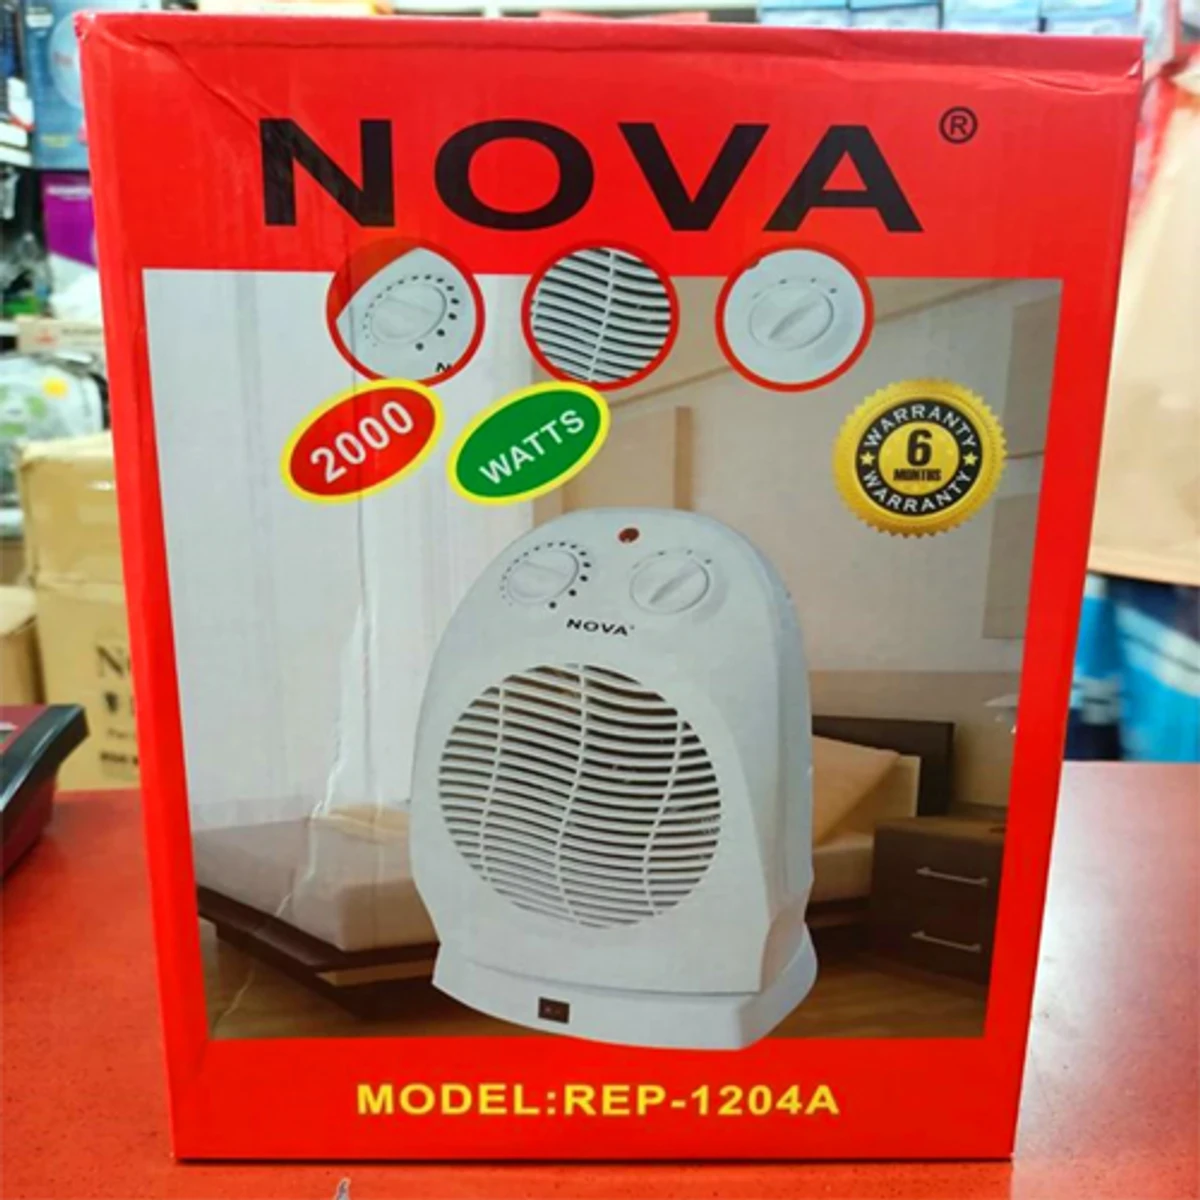 Nova REP-1204A Electric Room Heater with Cooling Mode